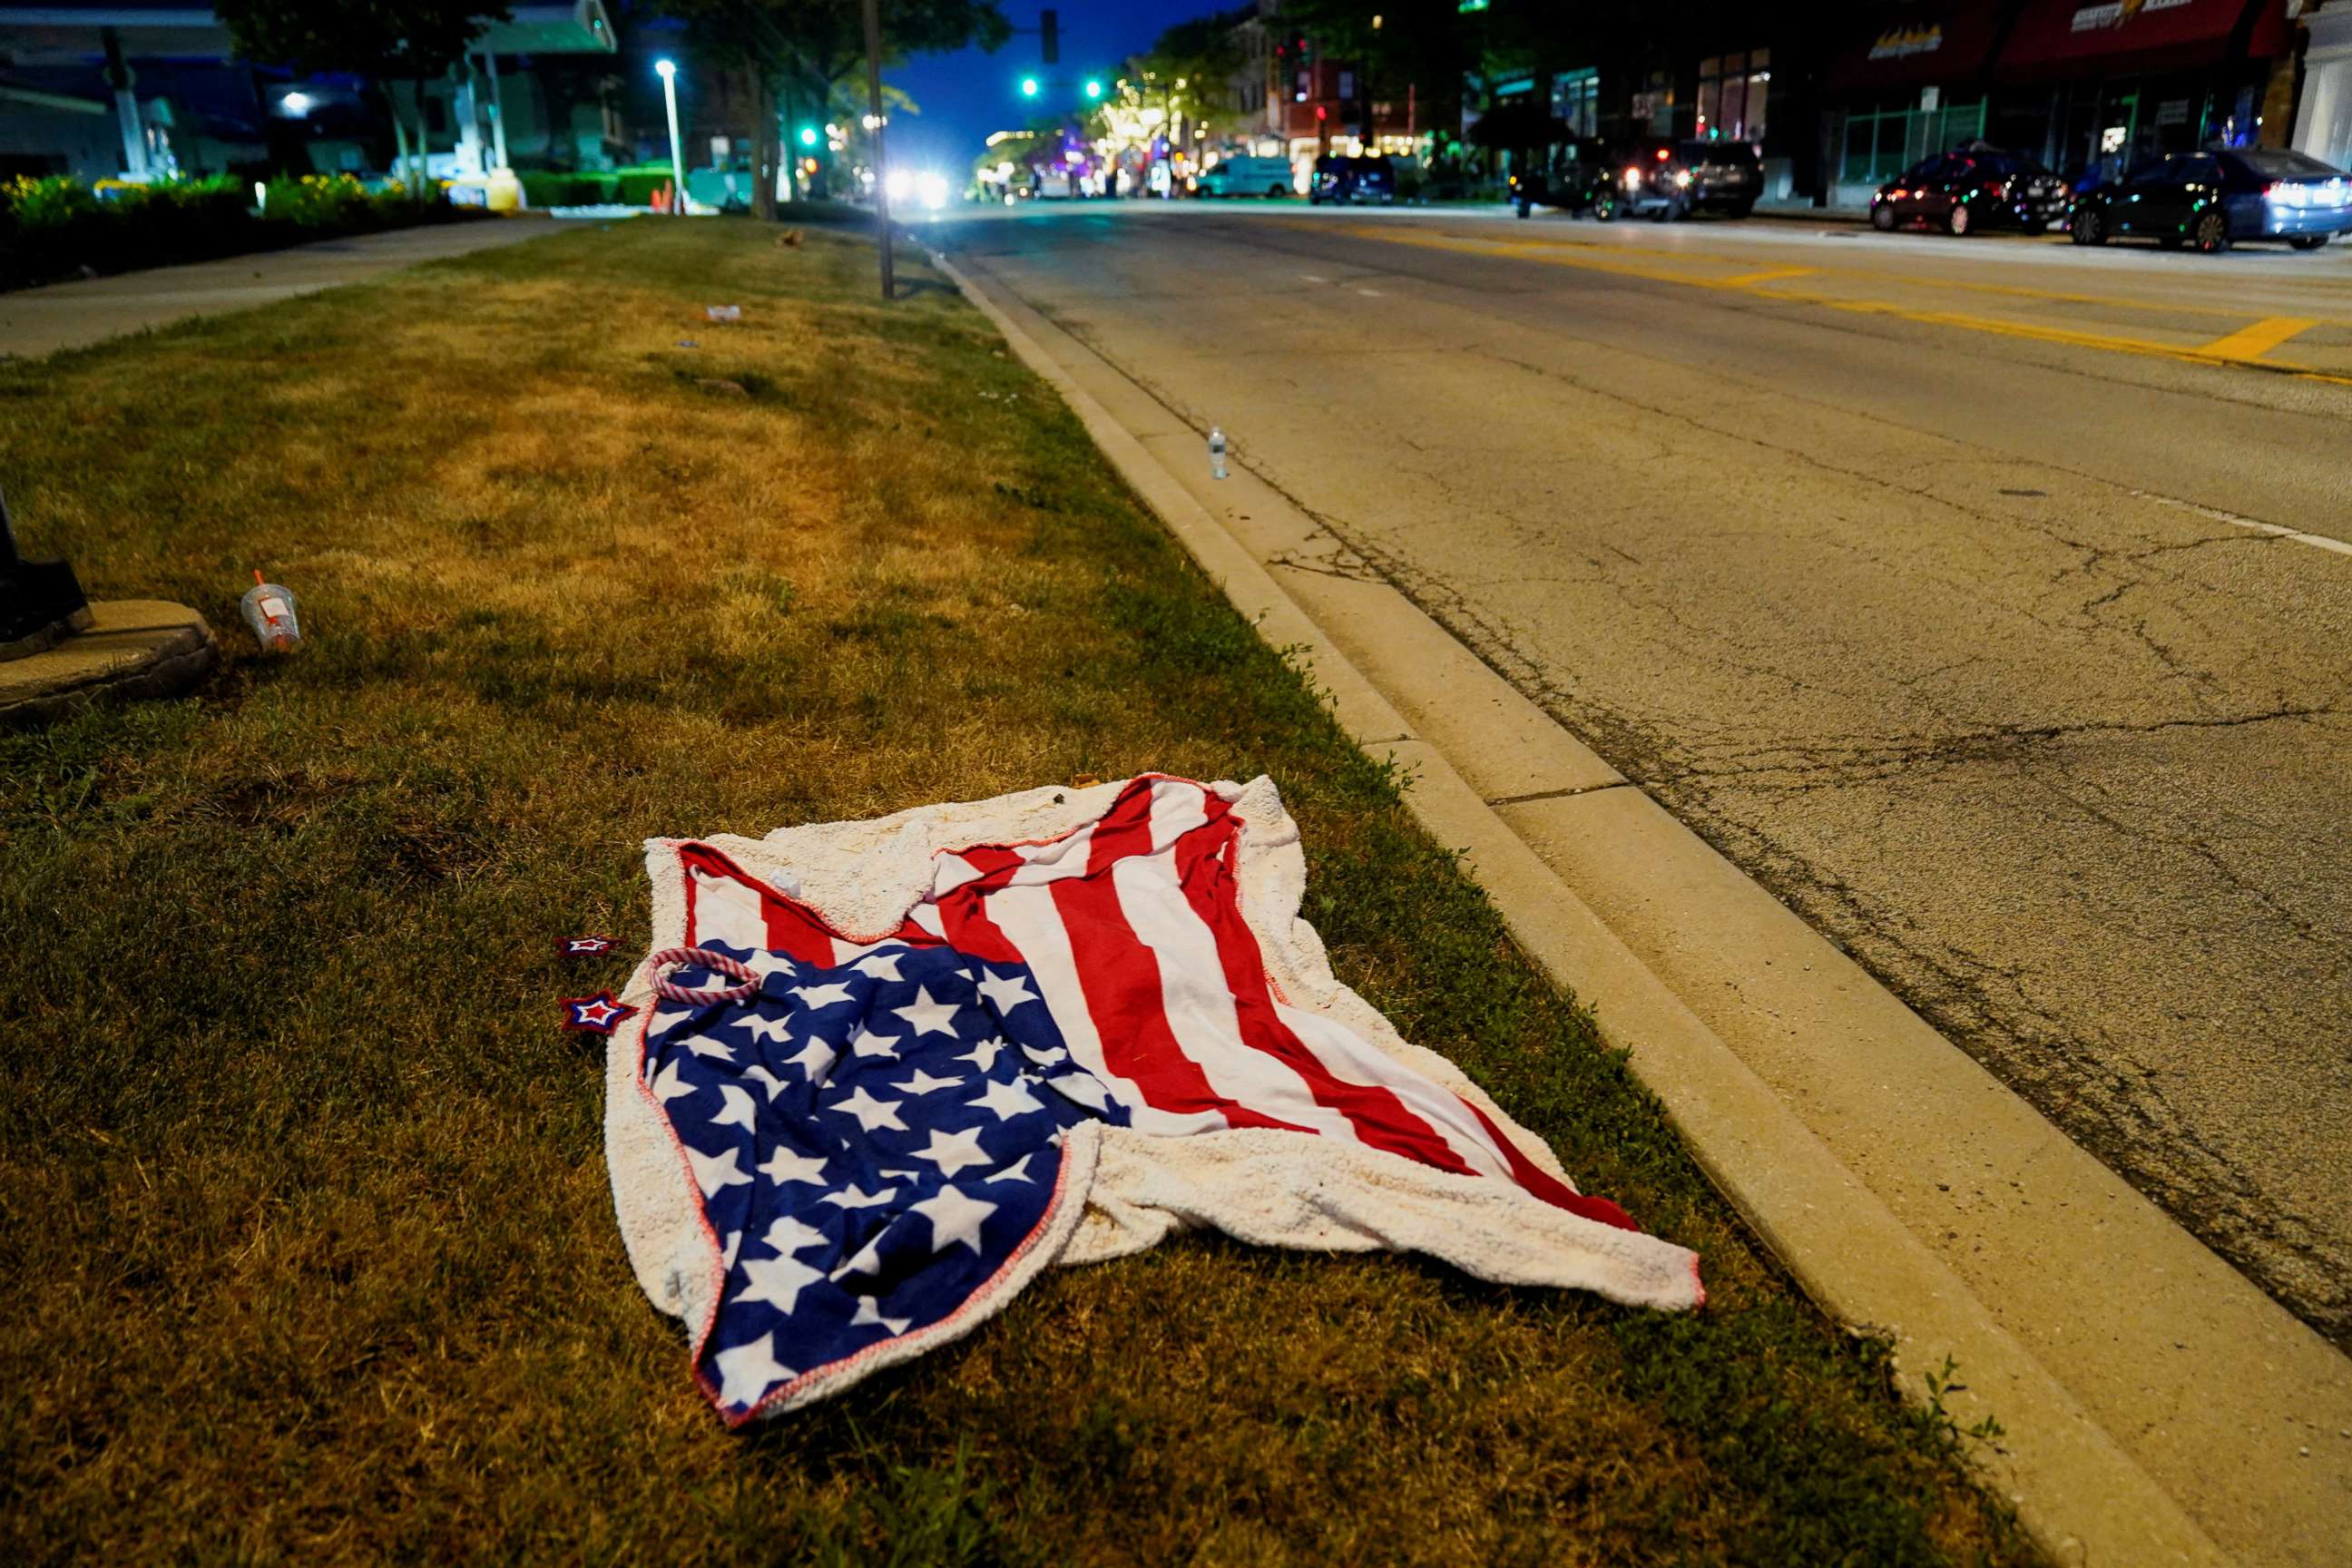 PHOTO: An American flag blanket is seen abandoned along the parade route after a mass shooting at a Fourth of July parade in the Chicago suburb of Highland Park, Illinois, on July 4, 2022.